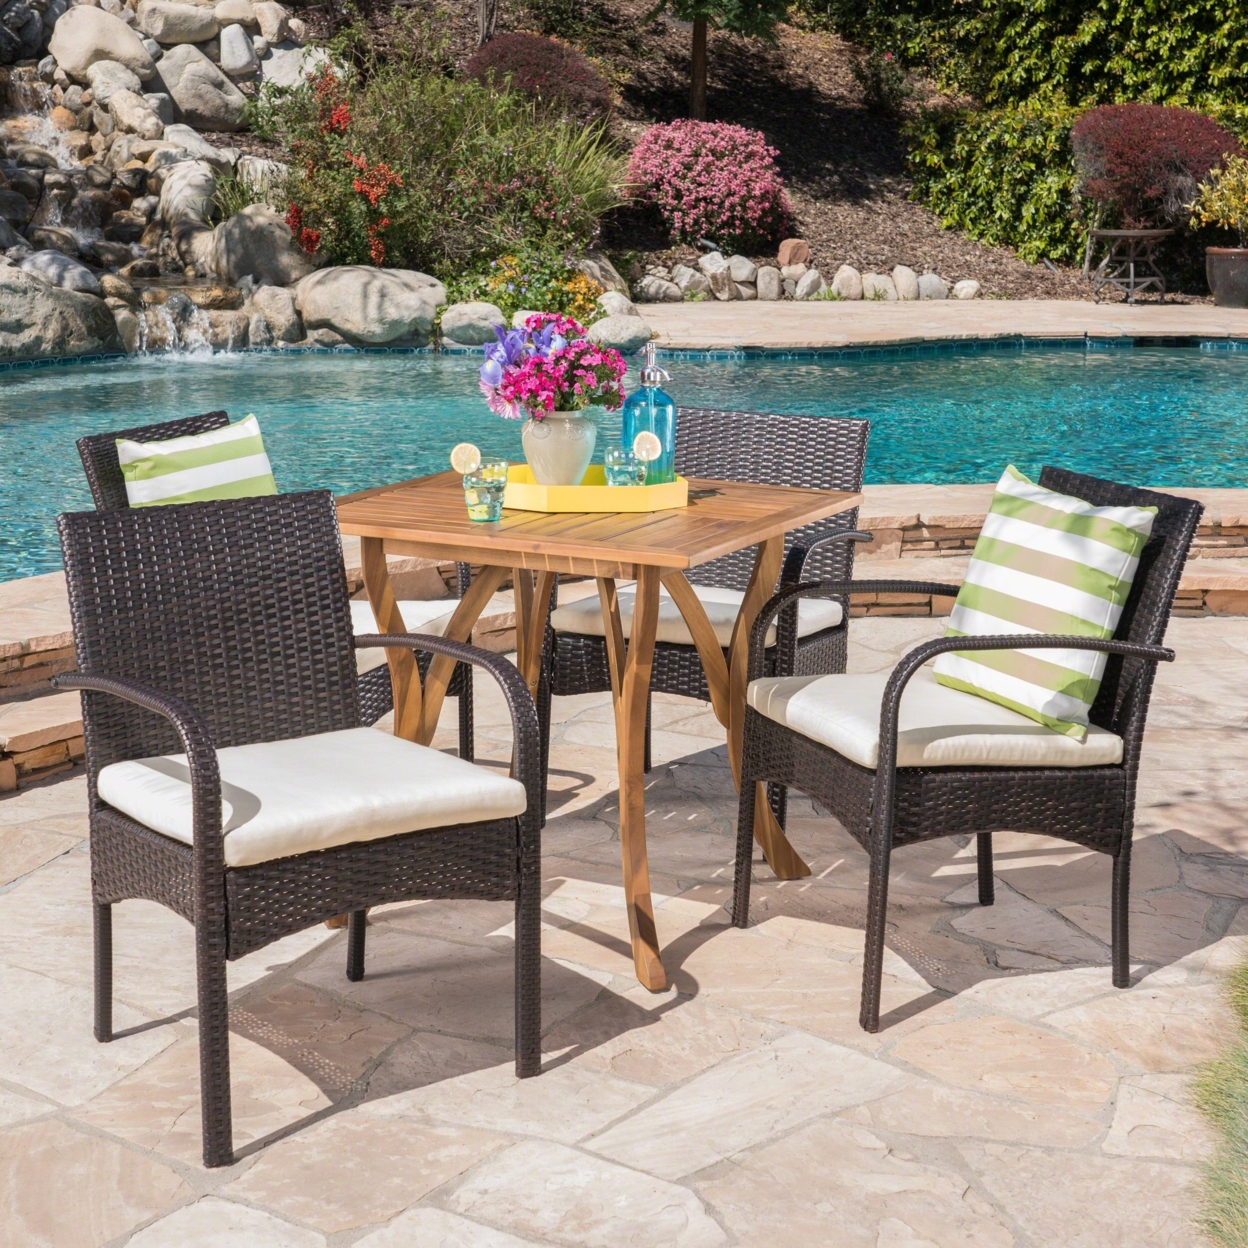 Derek Outdoor 5 Piece Acacia Wood/ Wicker Dining Set With Cushions, Teak Finish And Multibrown With CrÌ¬me